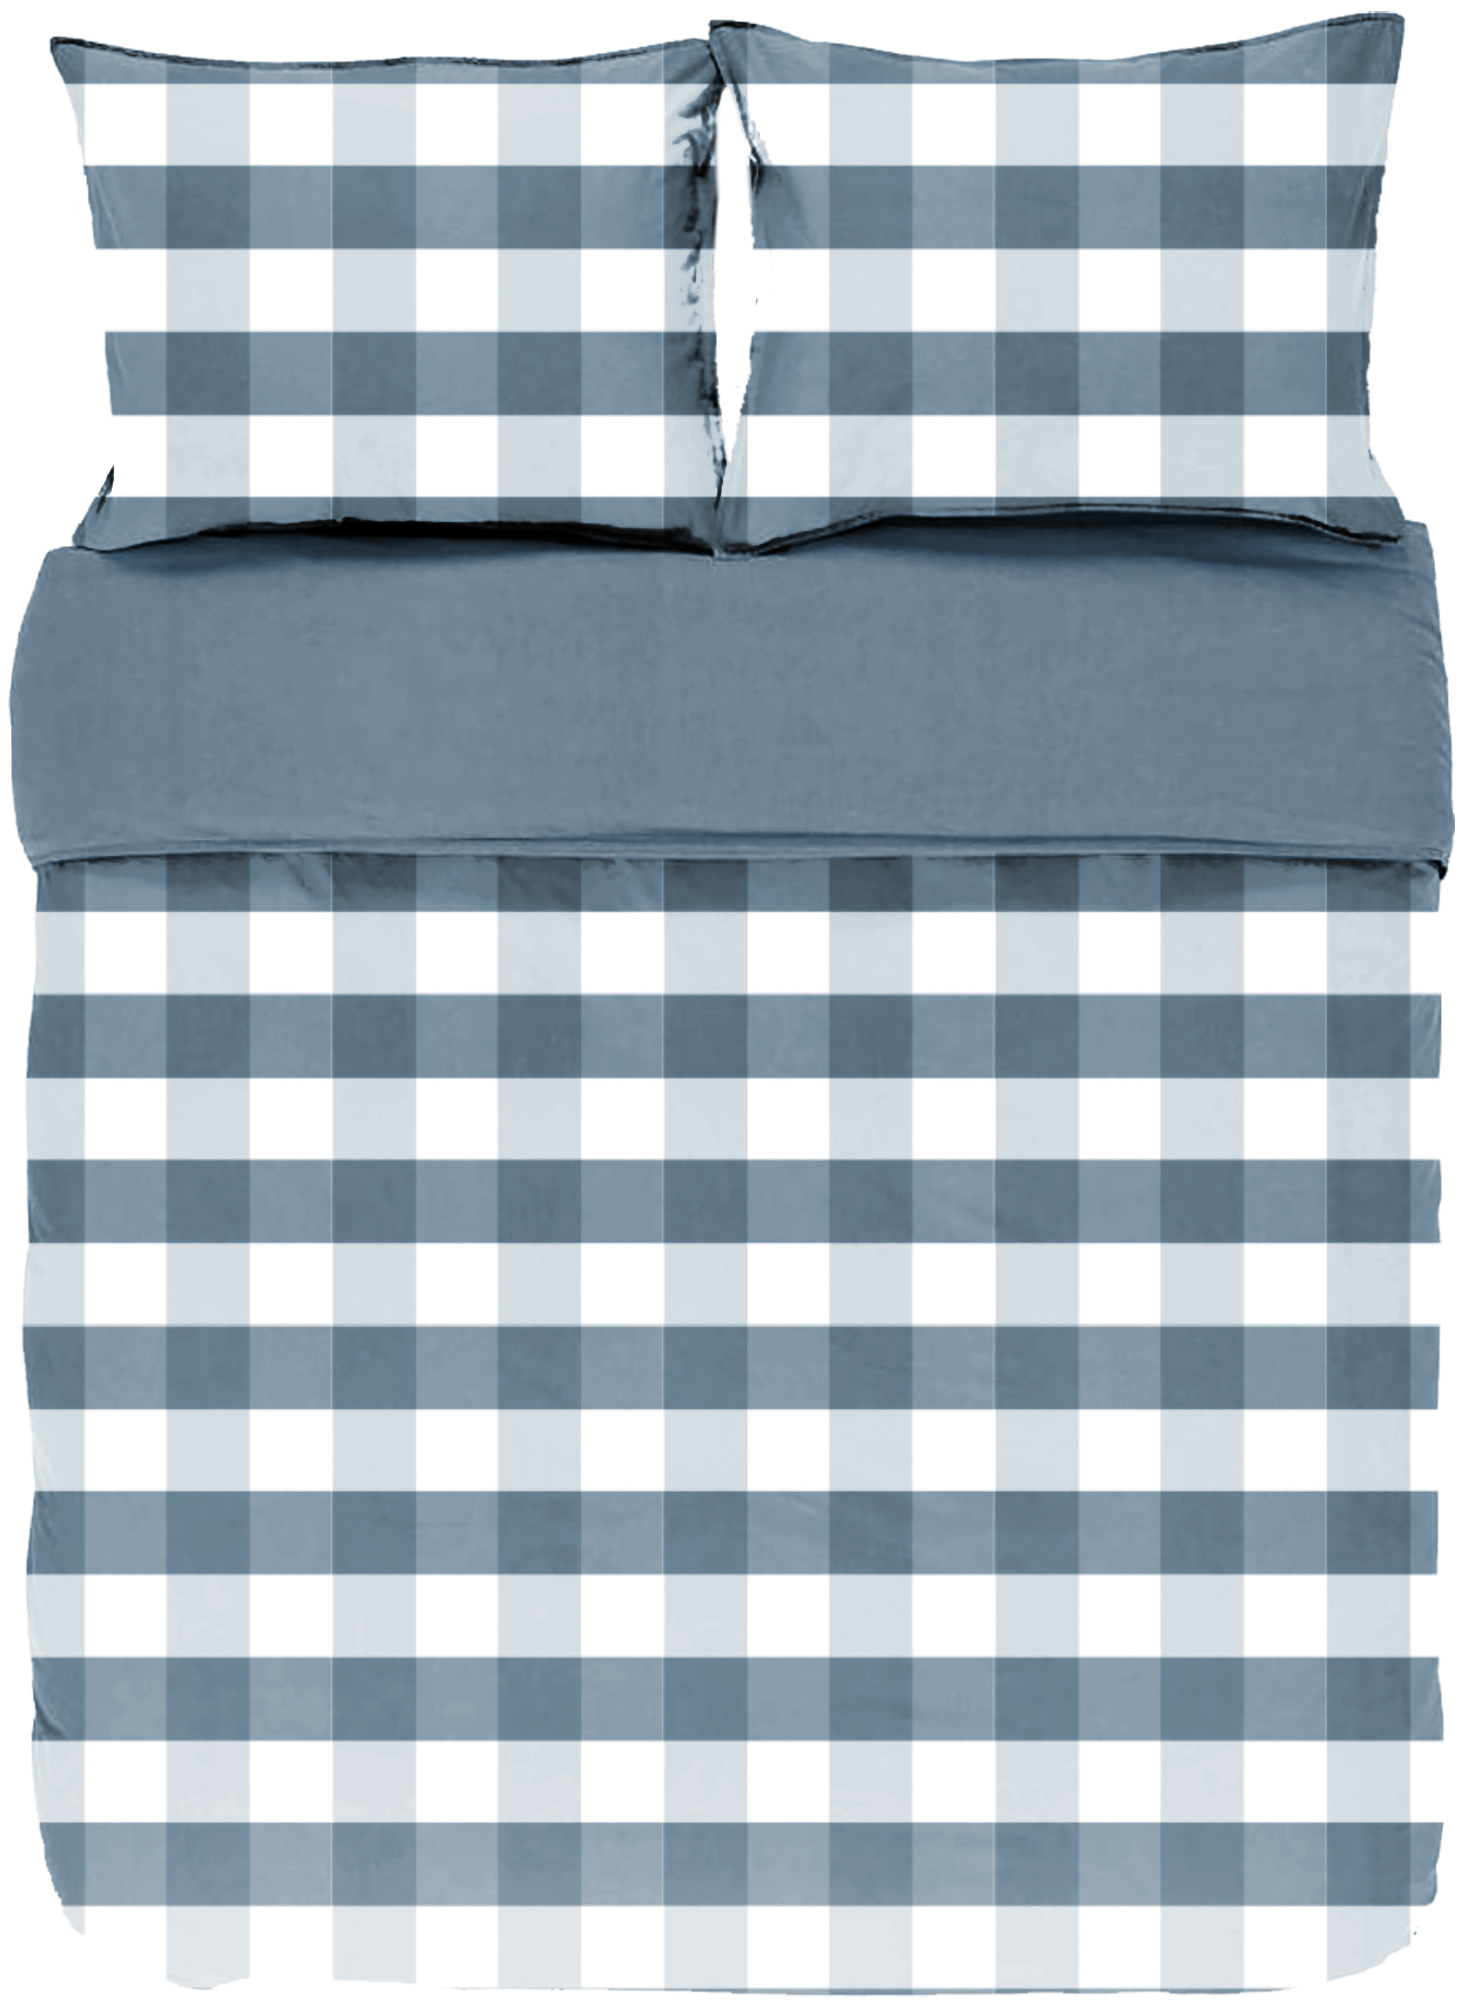 Duvet cover EMMA, Stone washed check cotton, 240x220, blue